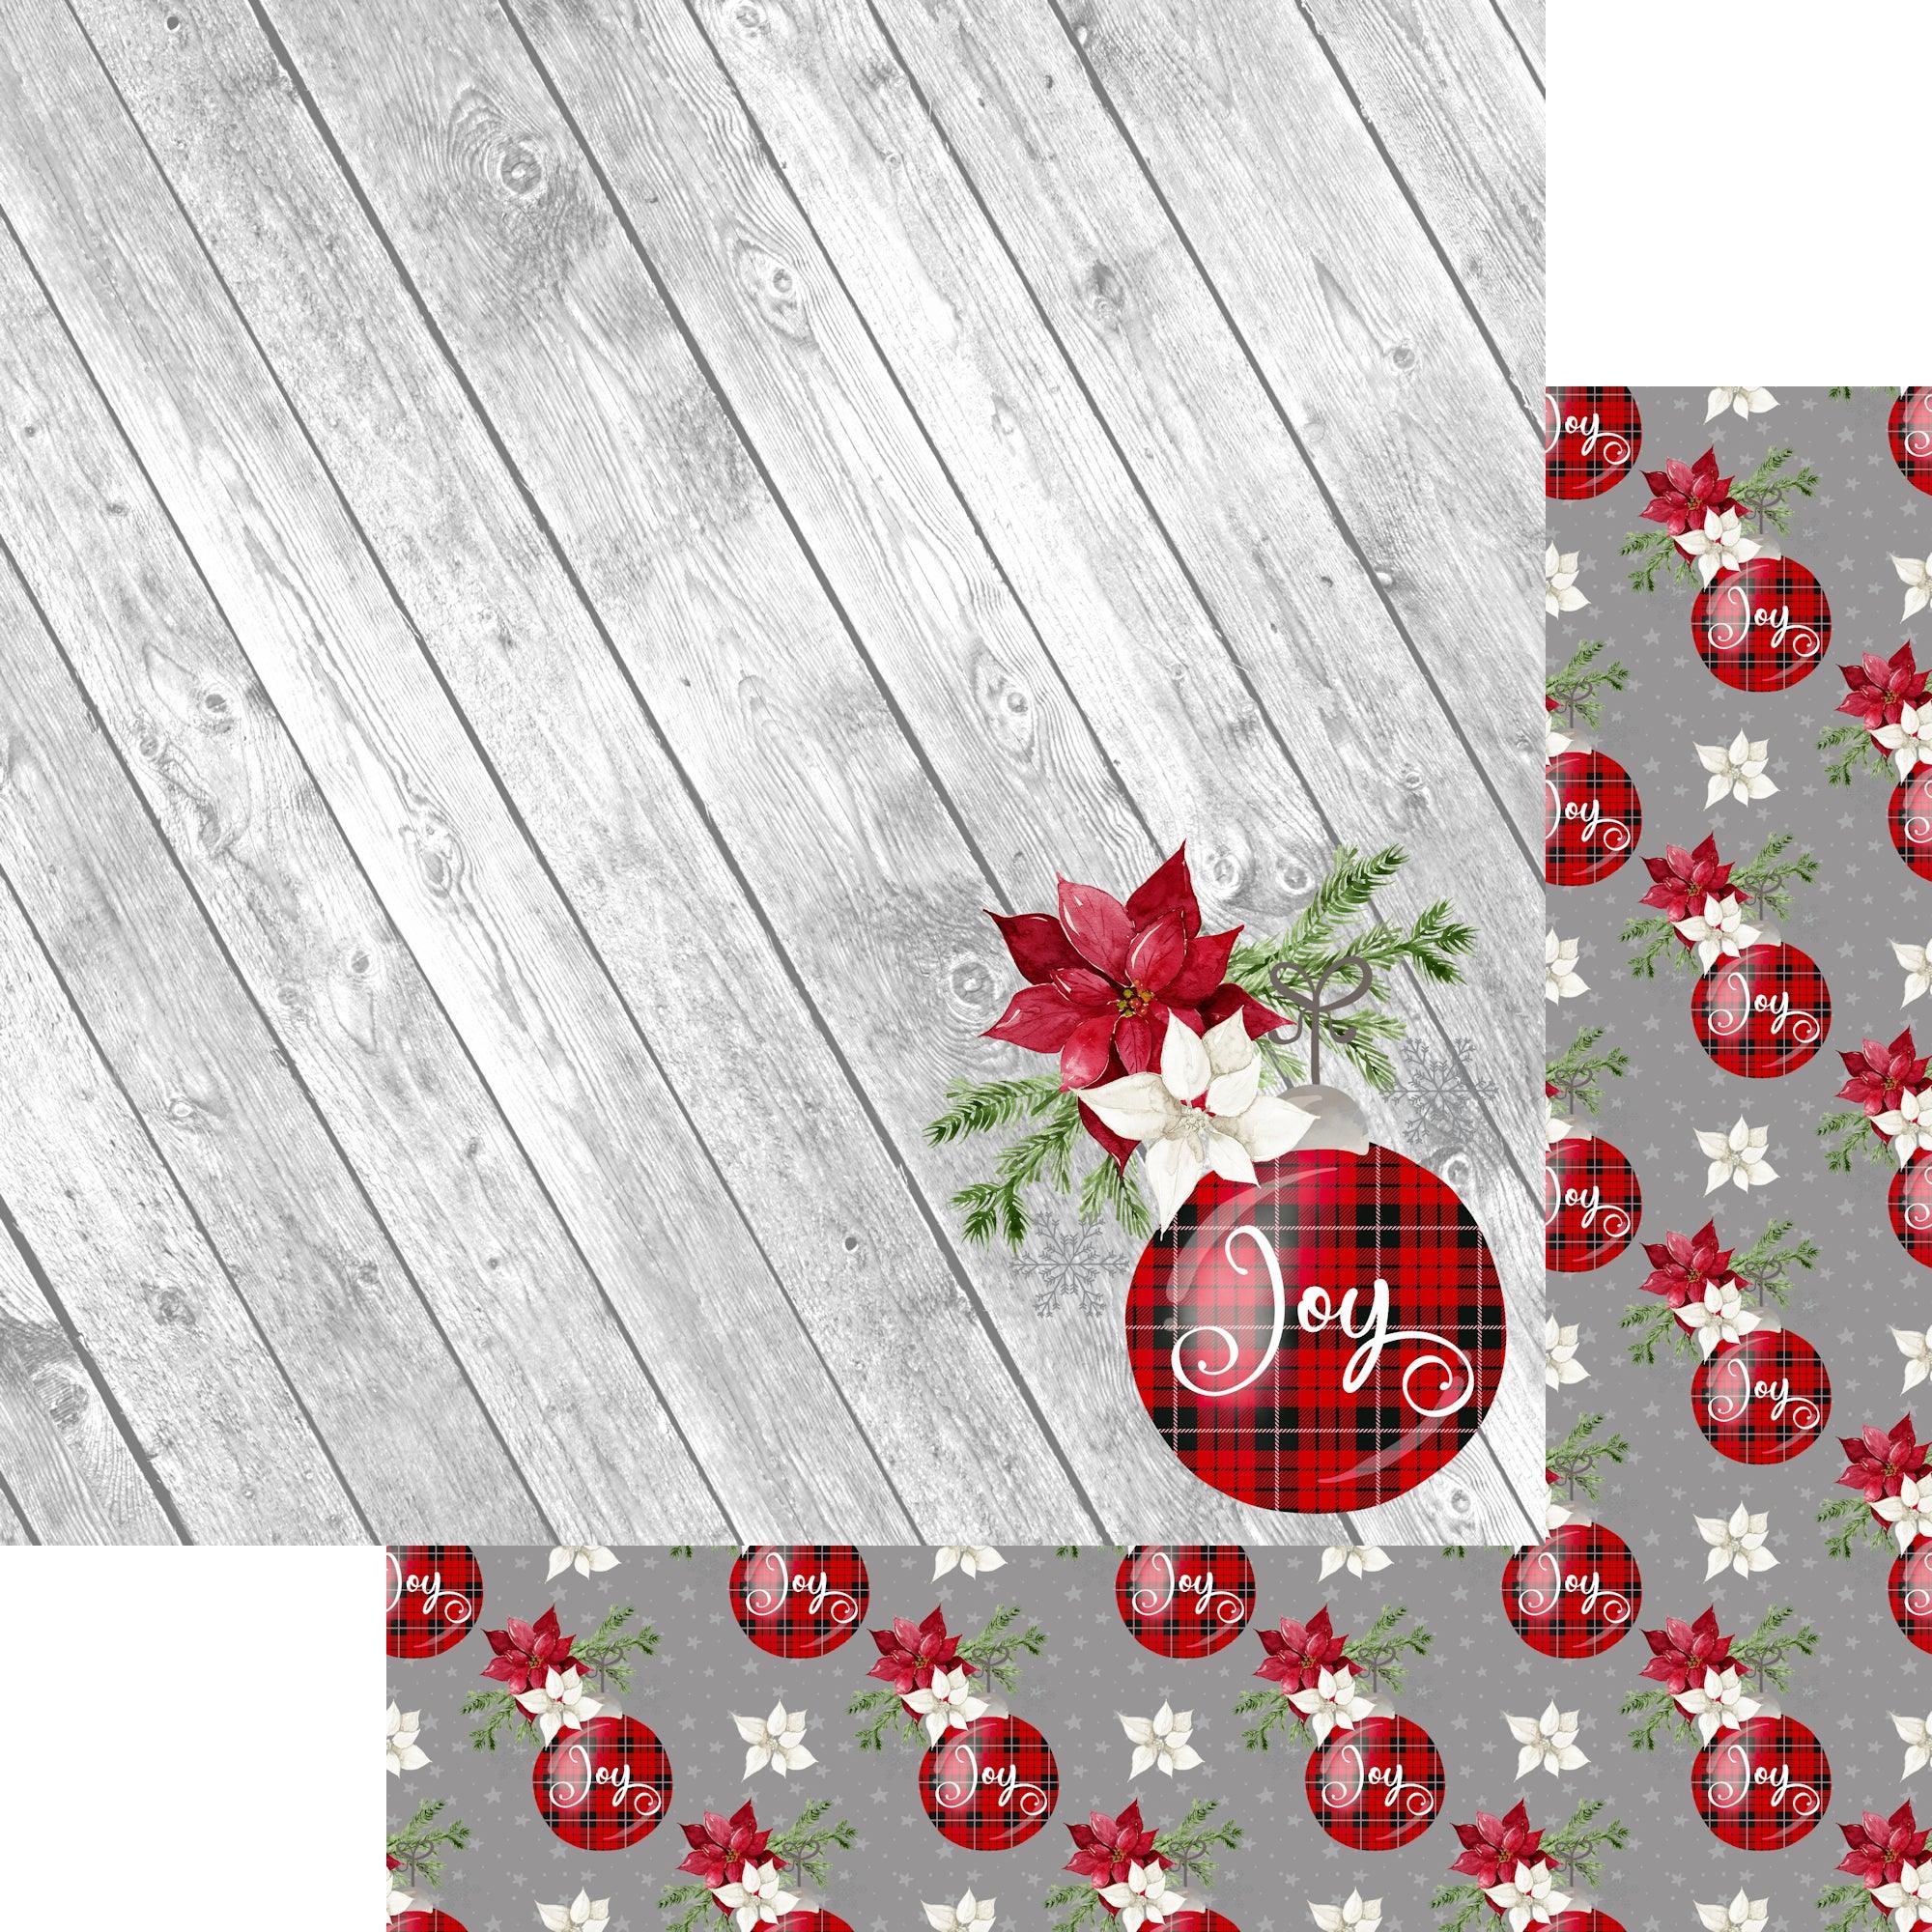 Buffalo Plaid Christmas Mini Collection Joy 12 x 12 Double-Sided Scrapbook Paper by SSC Designs - Scrapbook Supply Companies